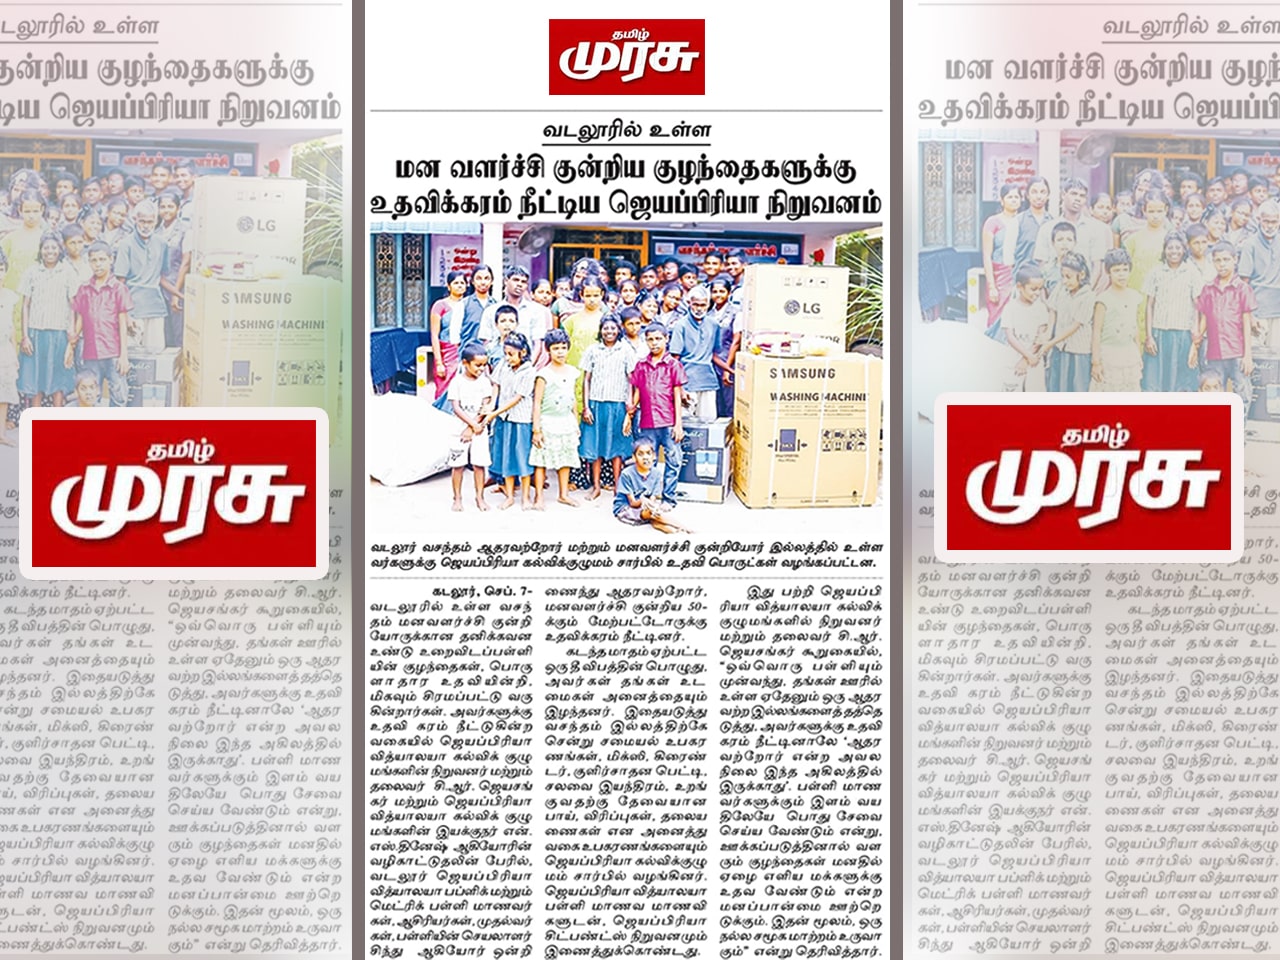 JPV extended a helping hand to challenged children of Vadalur.